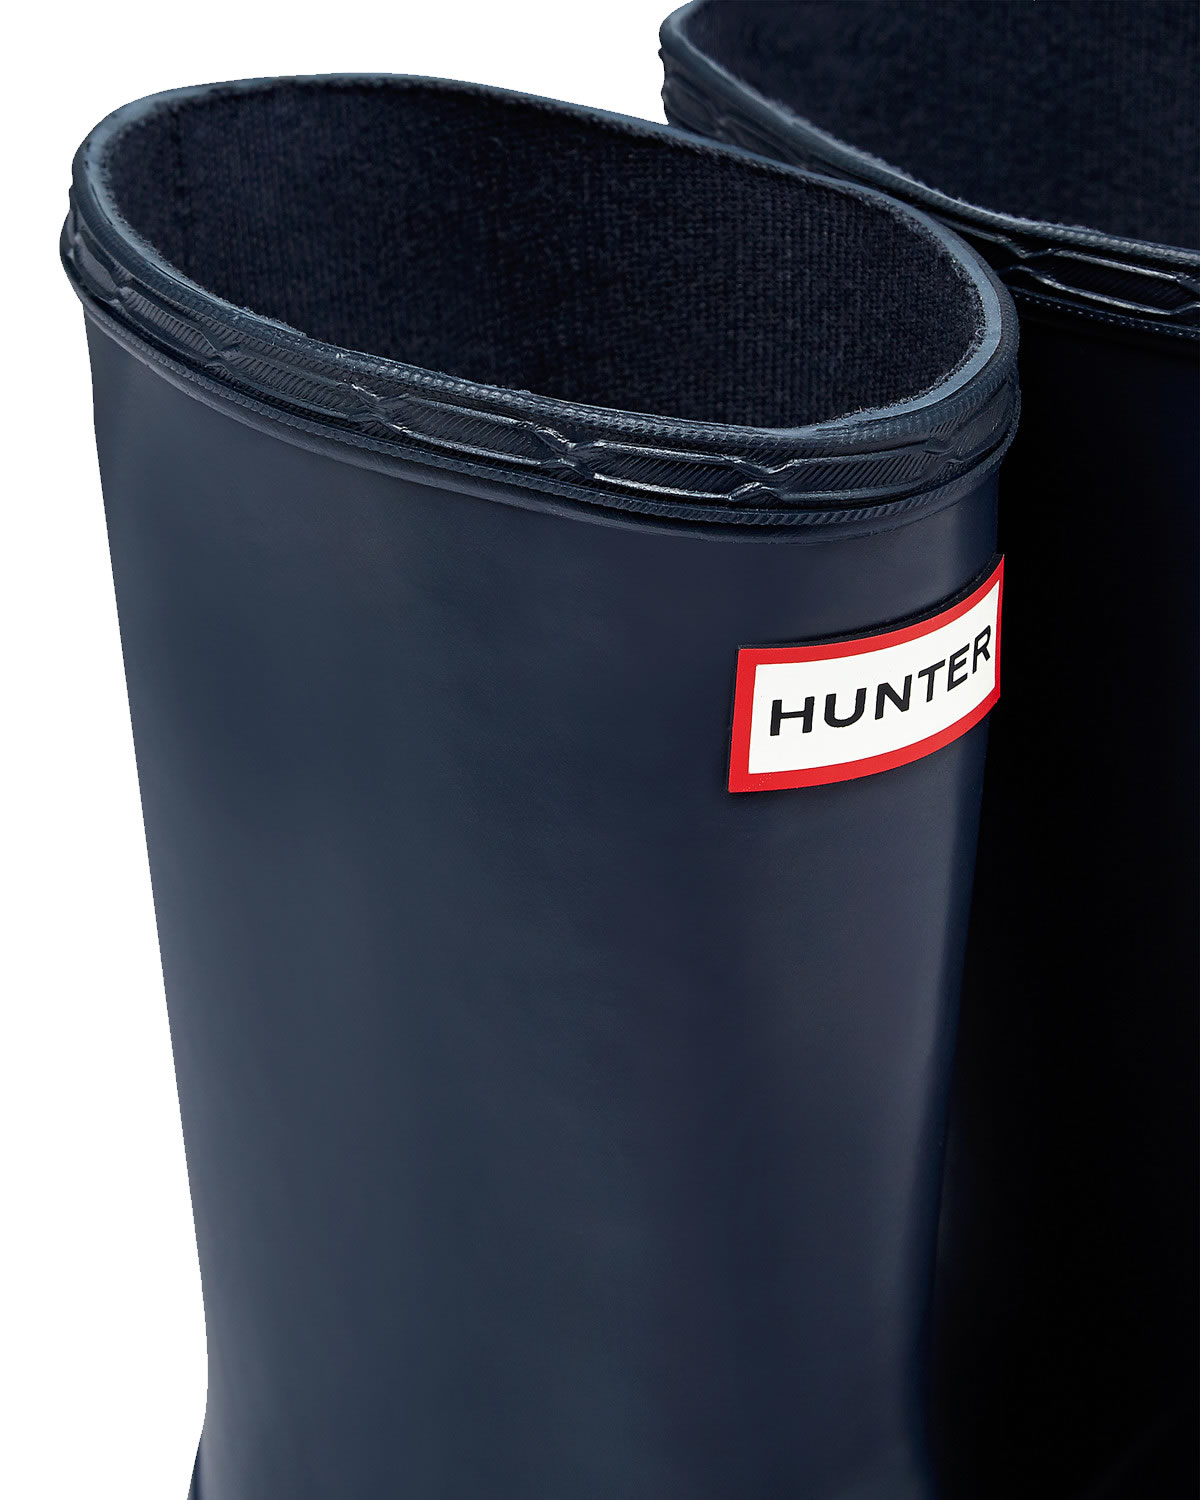 Extra image of Kids First Hunter Wellies - Navy UK 5 INF (EURO 22)